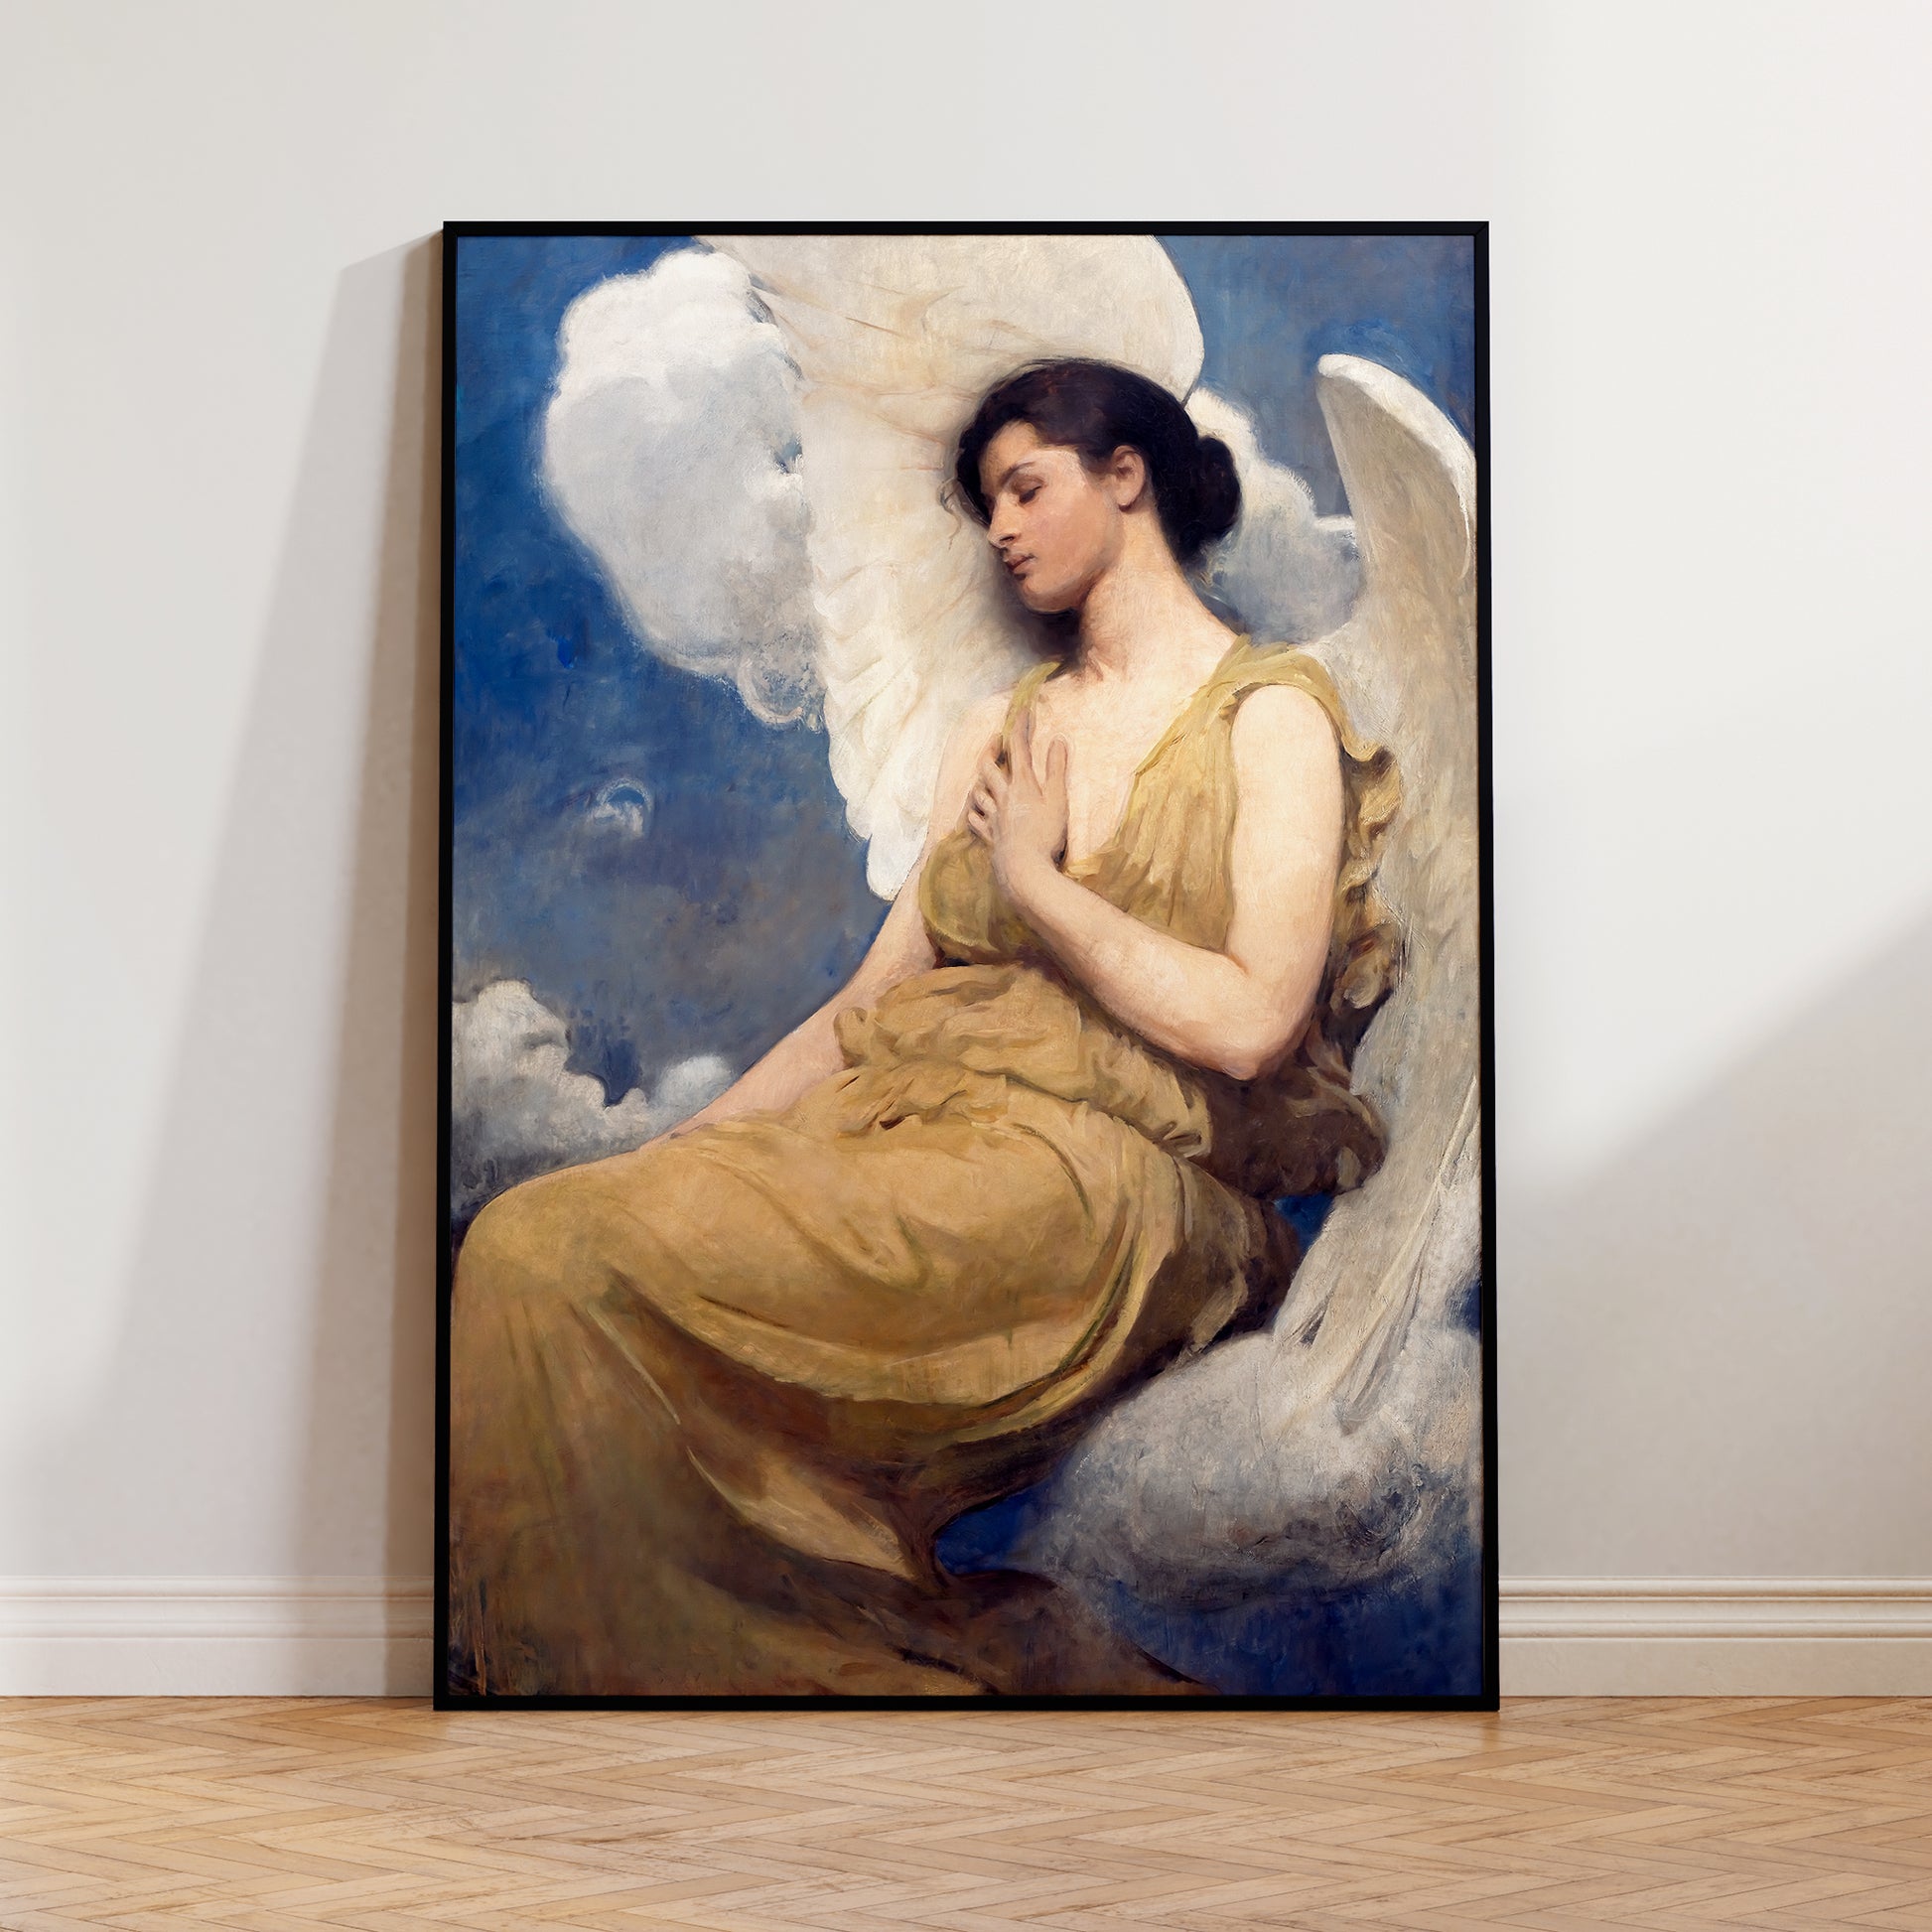 Be inspired by our classic art print Winged Figure by Abbott Handerson Thayer. This artwork was printed using the giclée process on archival acid-free paper and is presented in a modern black fram that captures its timeless beauty in every detail.